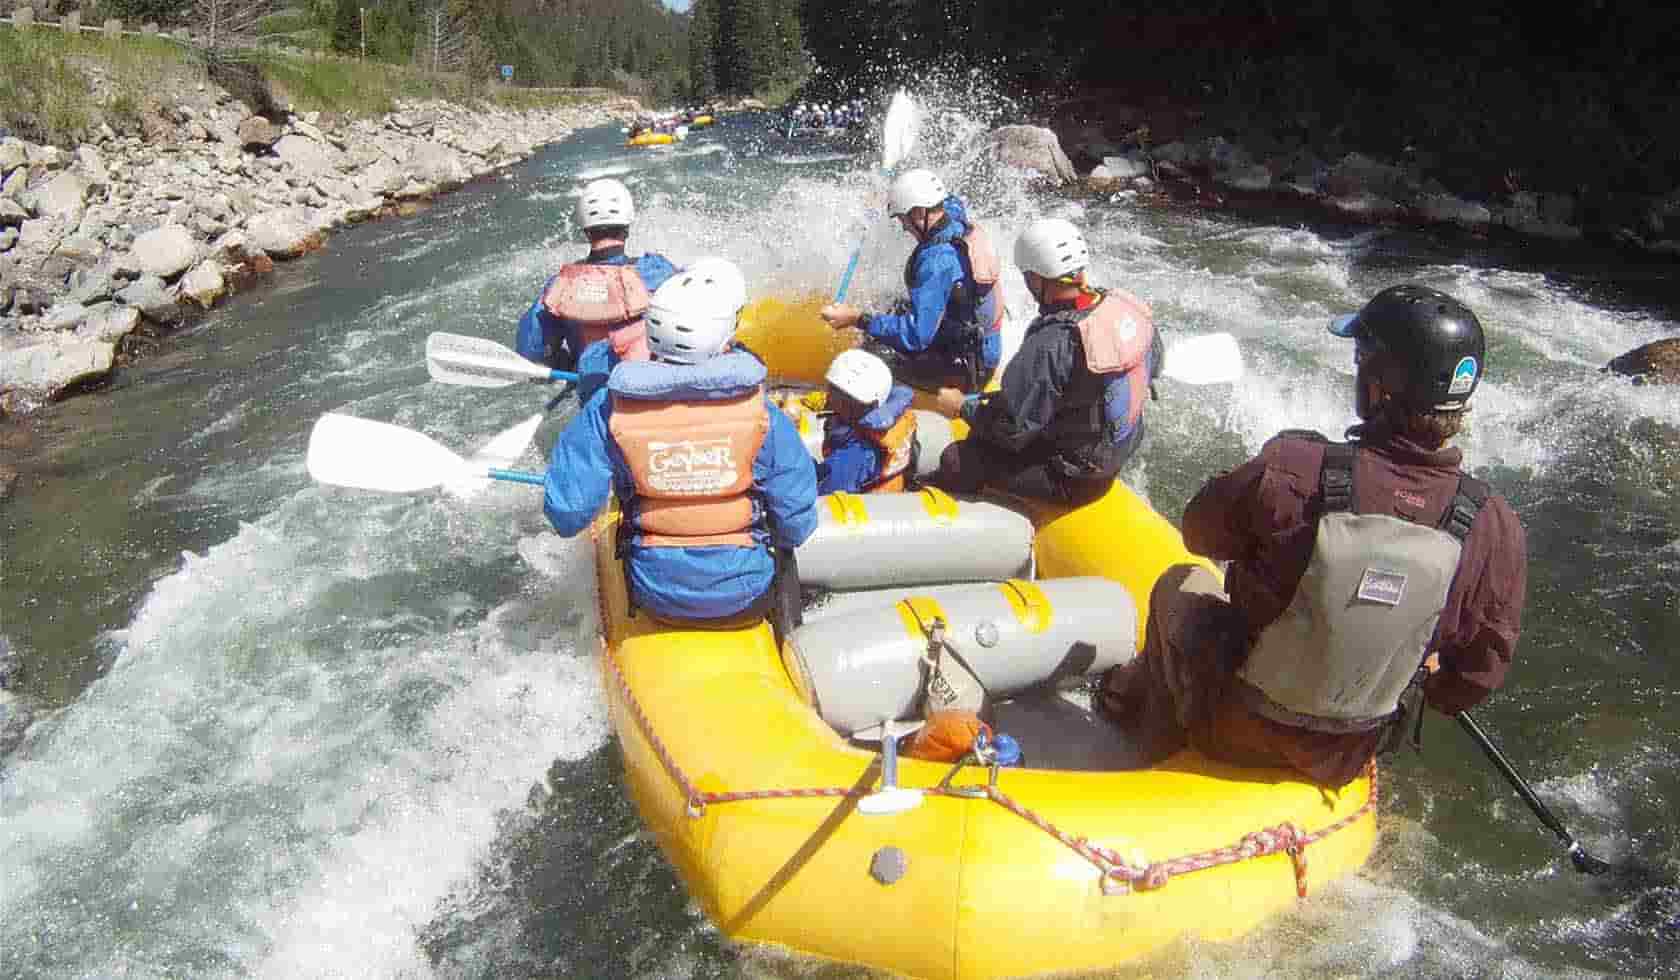 Geyser Whitewater Expeditions